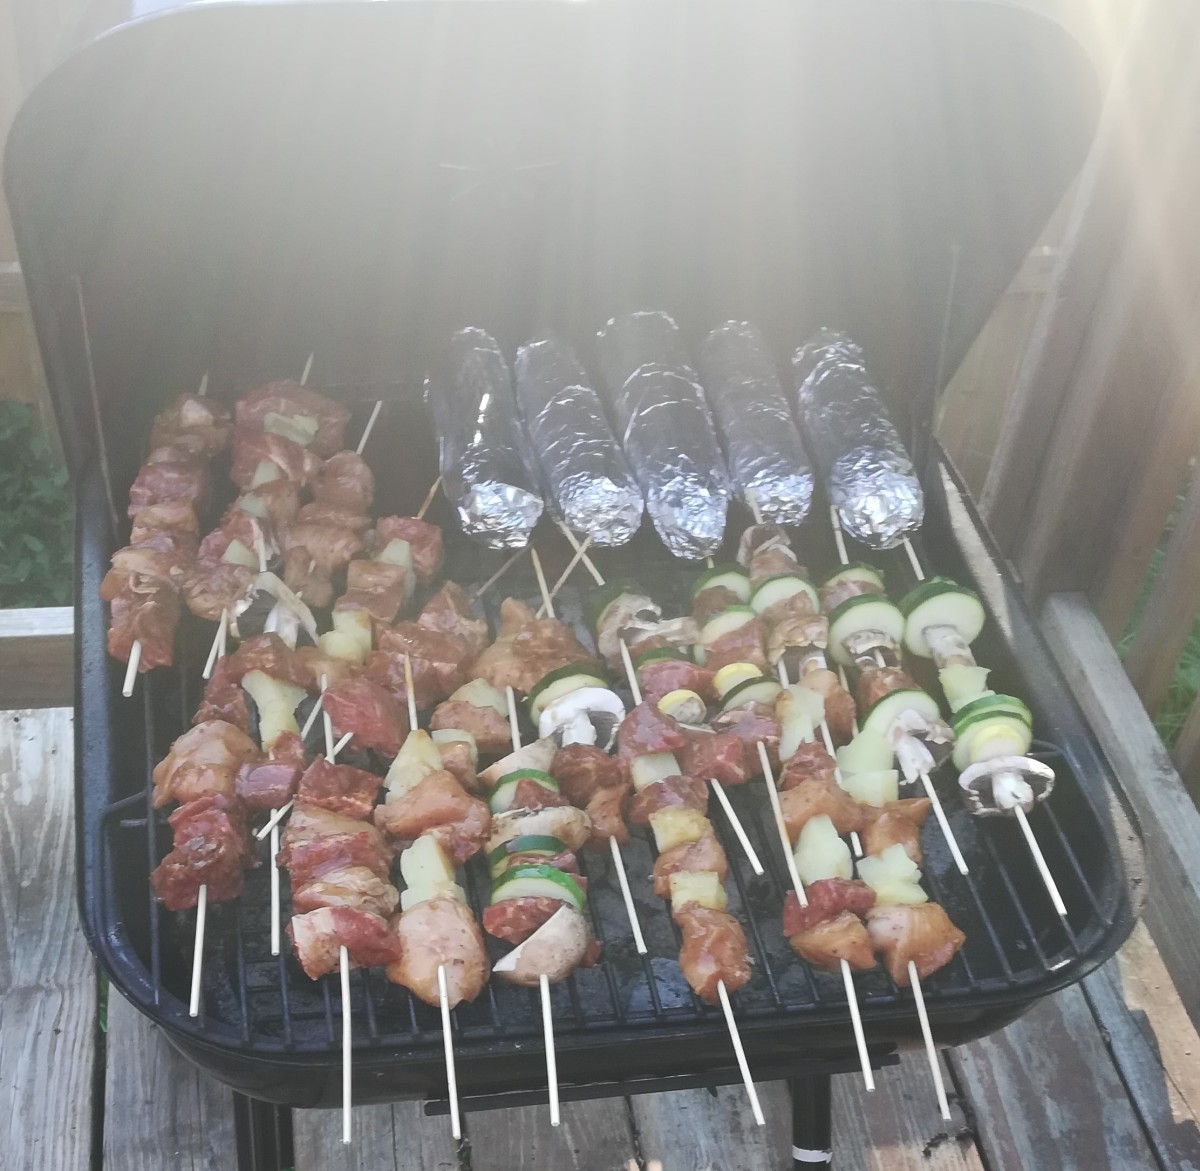 Kabobs on the grill with corn on the cob